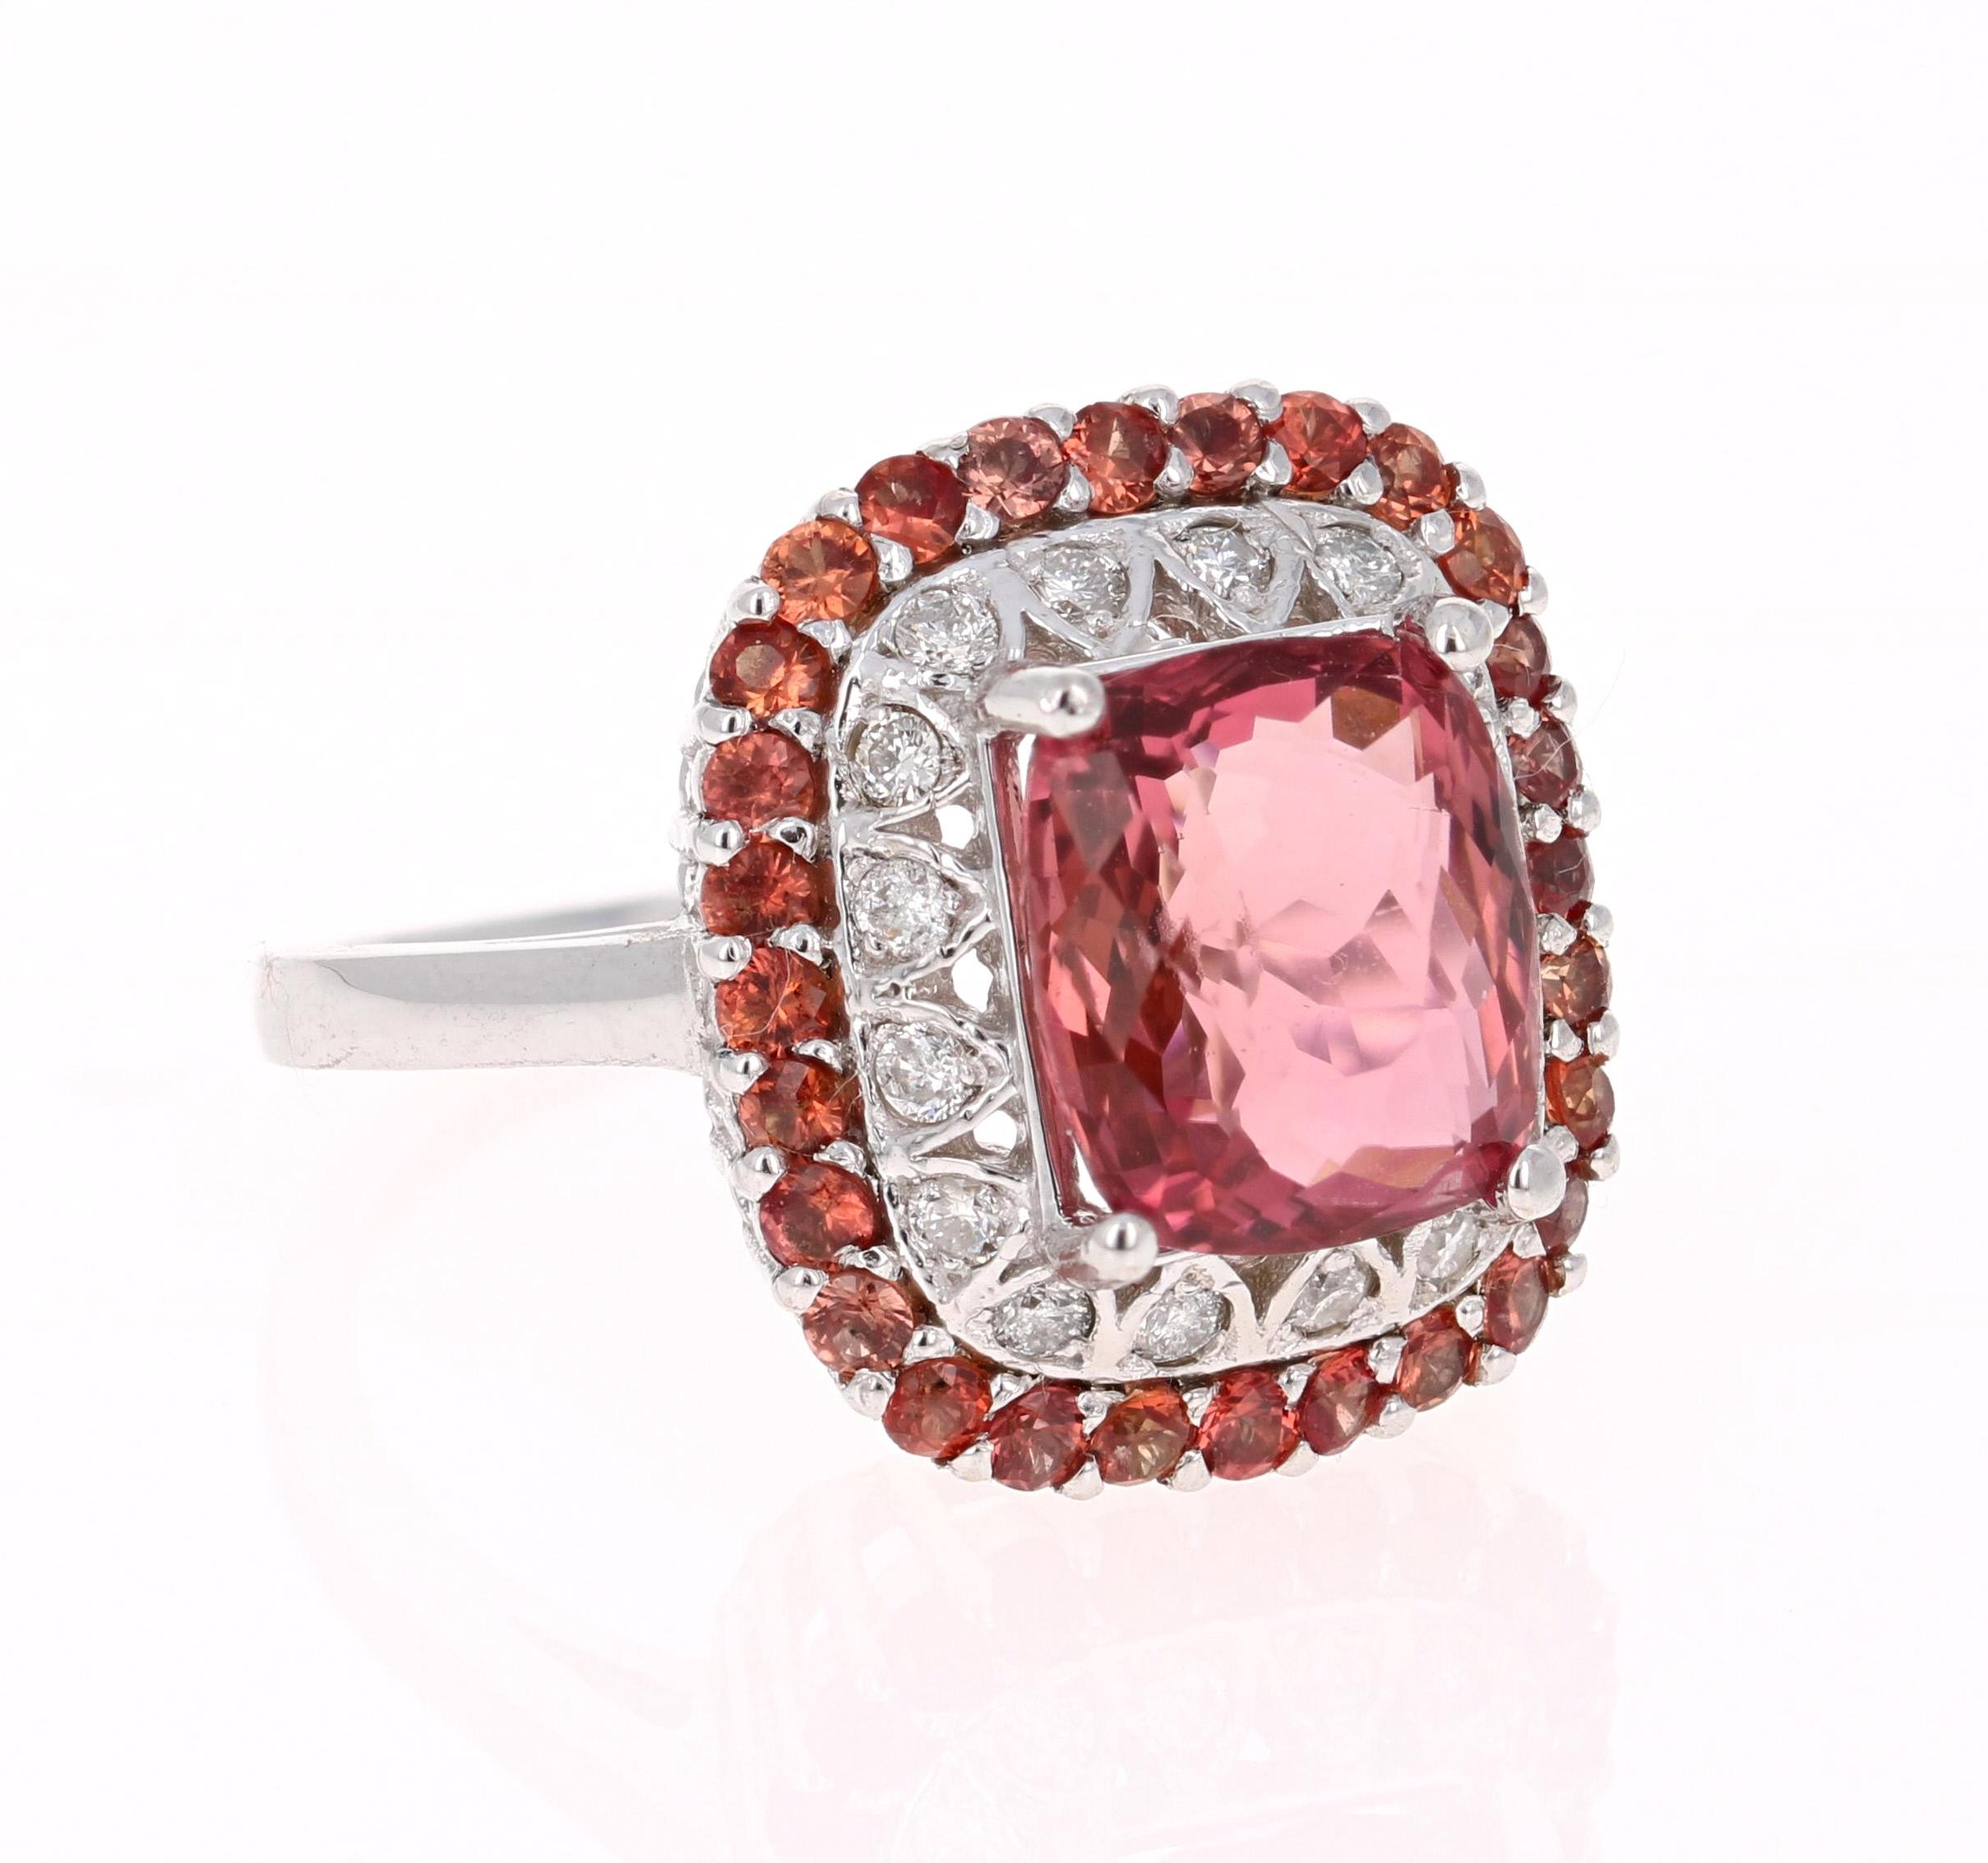 Wow! Beautiful and Unique Tourmaline Ring in a gorgeous White Gold Setting.

This ring has a Cushion Cut Orangey-Mauve Tourmaline that weighs 3.79 Carats. Floating around the tourmaline are 16 Round Cut Diamonds in a halo weighing 0.28 Carats.